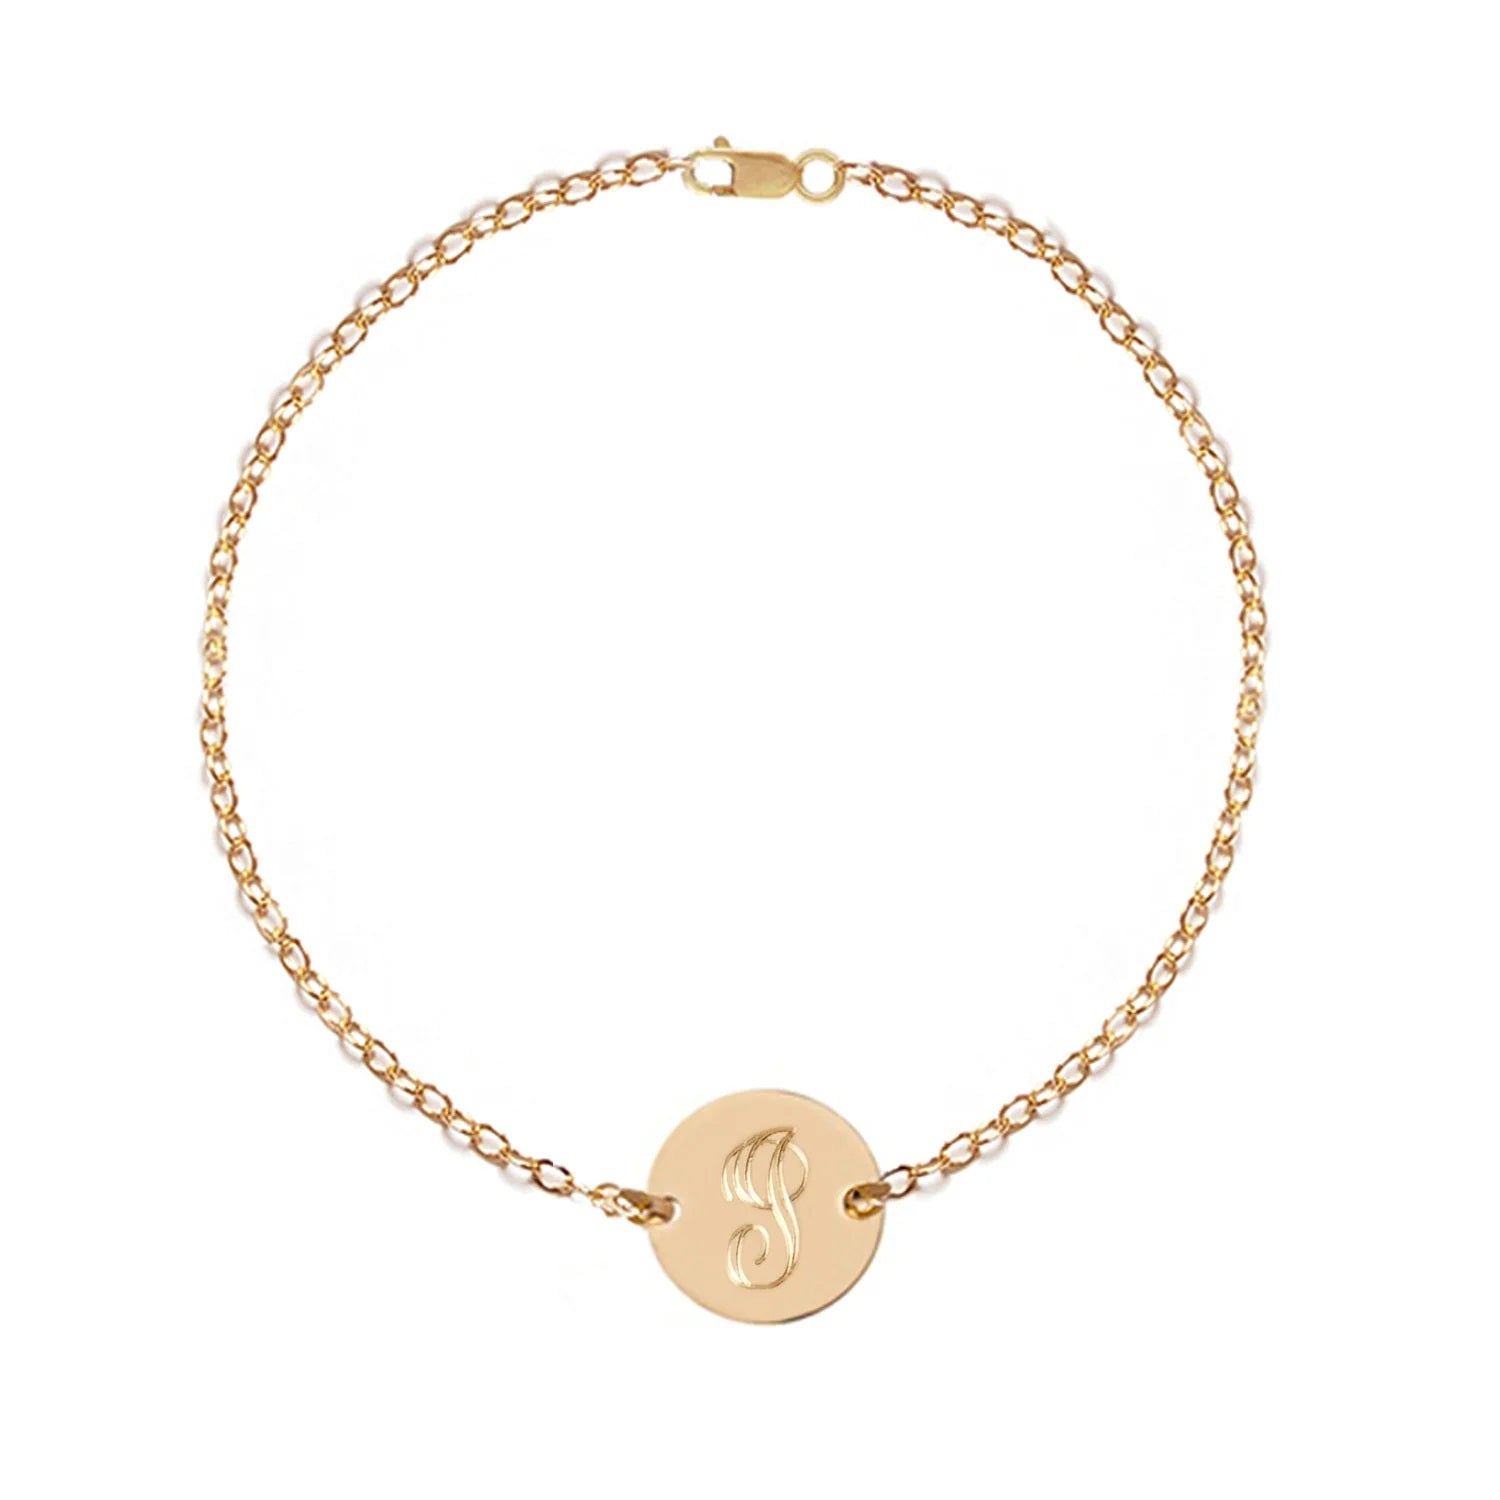 Gold Filled Disc Initial Bracelet/Anklet - 1 to 6 charms